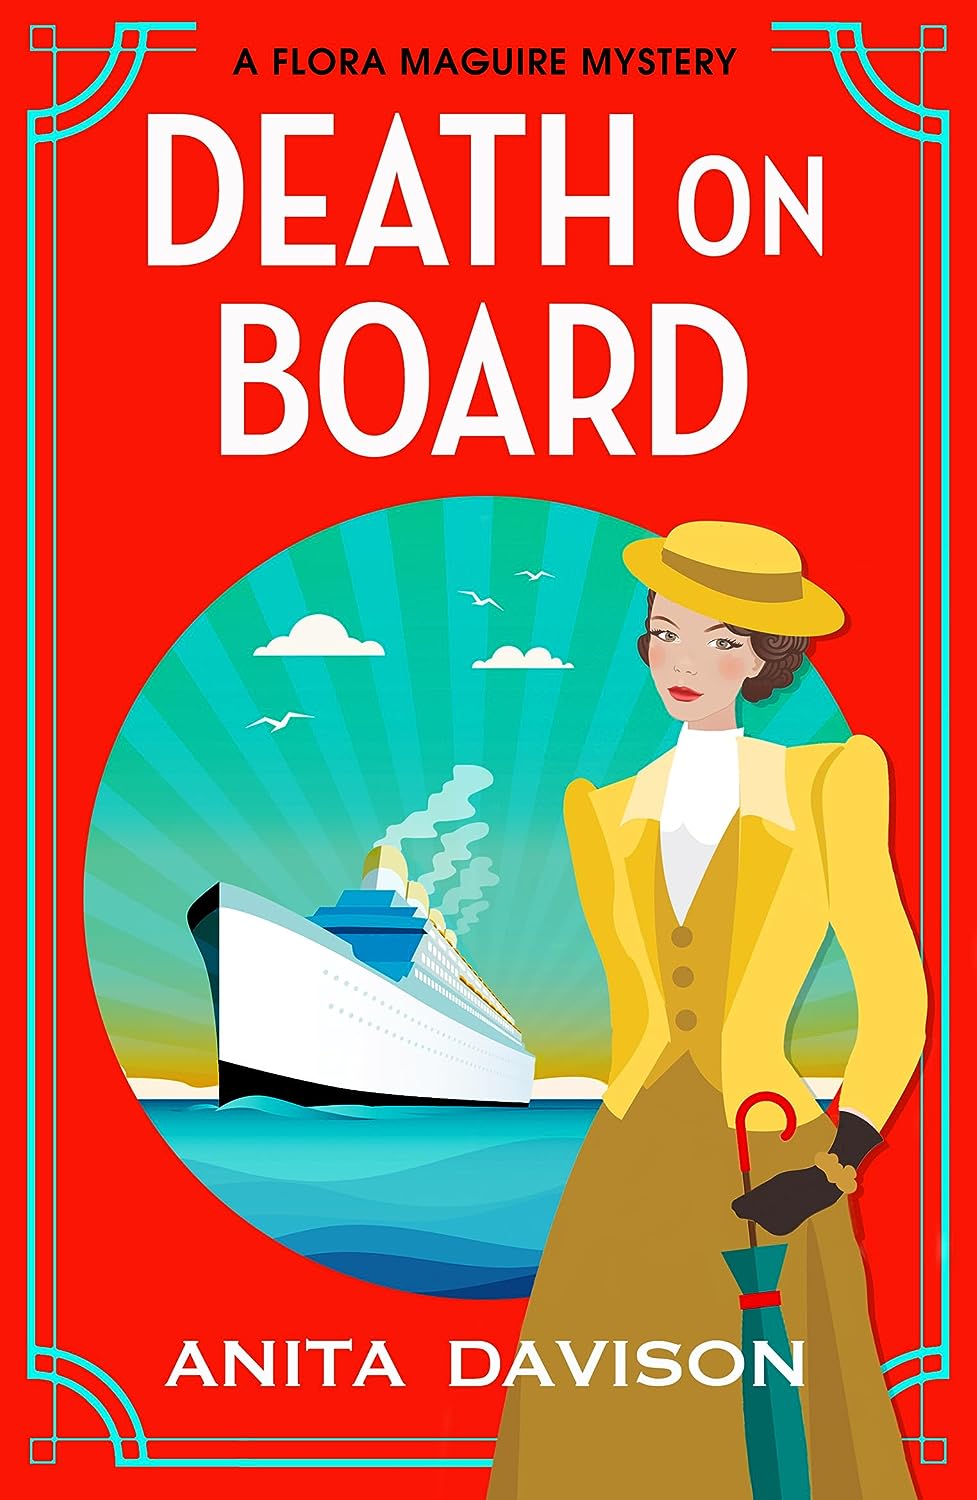 I’m excited to share my review for Death on Board by Anita Davison, the first book in a new cosy historical mystery series #newrelease